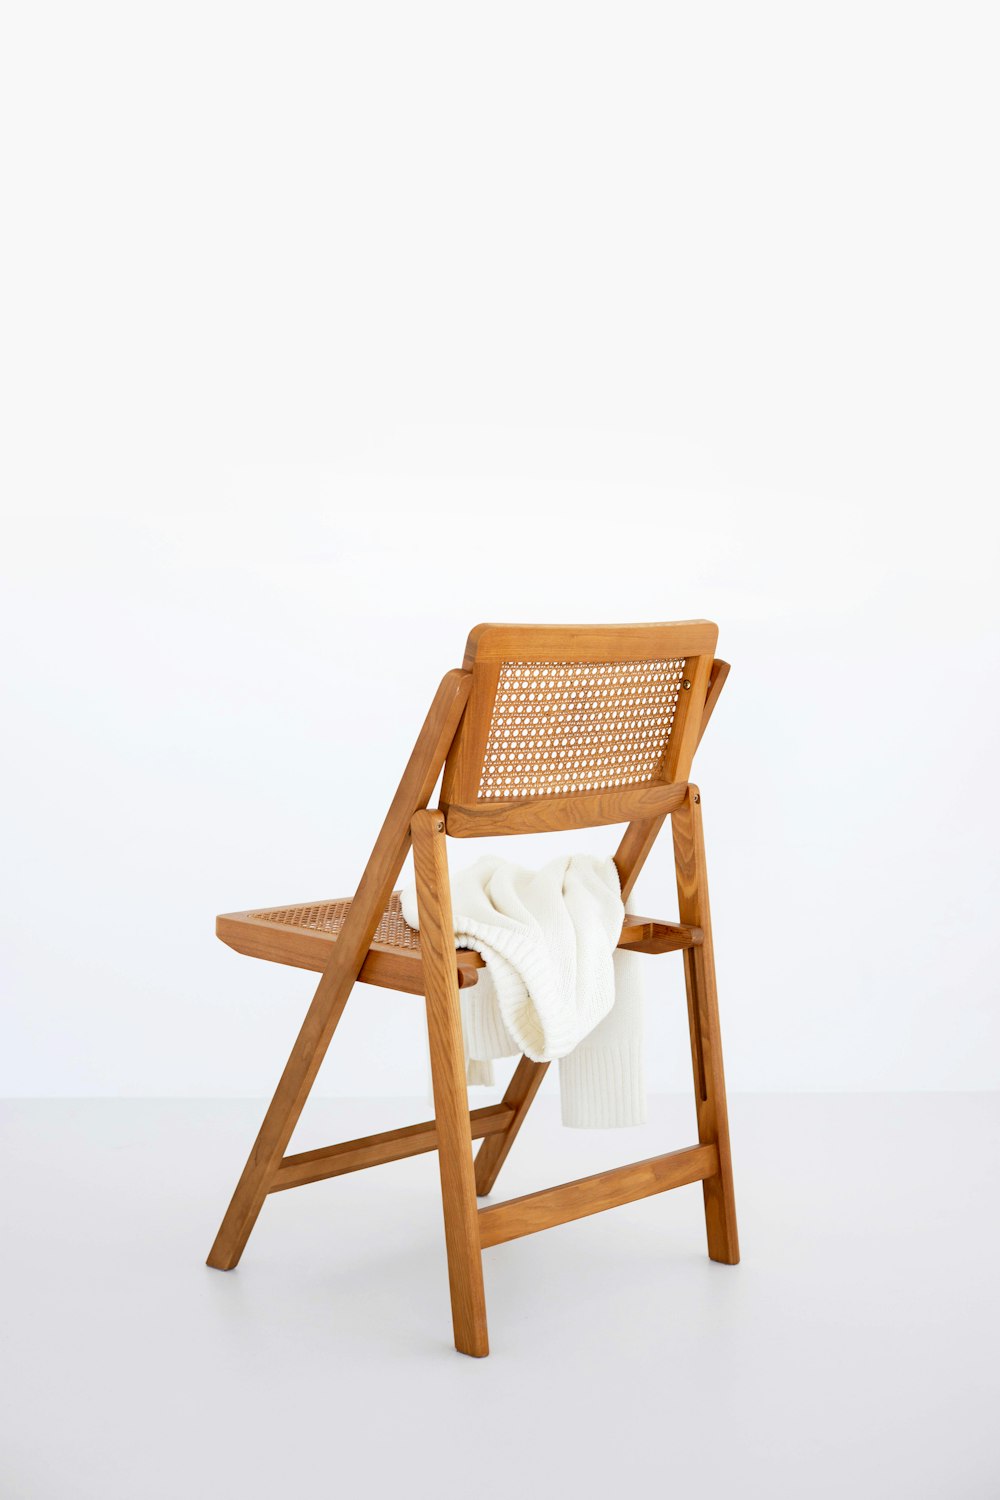 a wooden chair with a white blanket on it